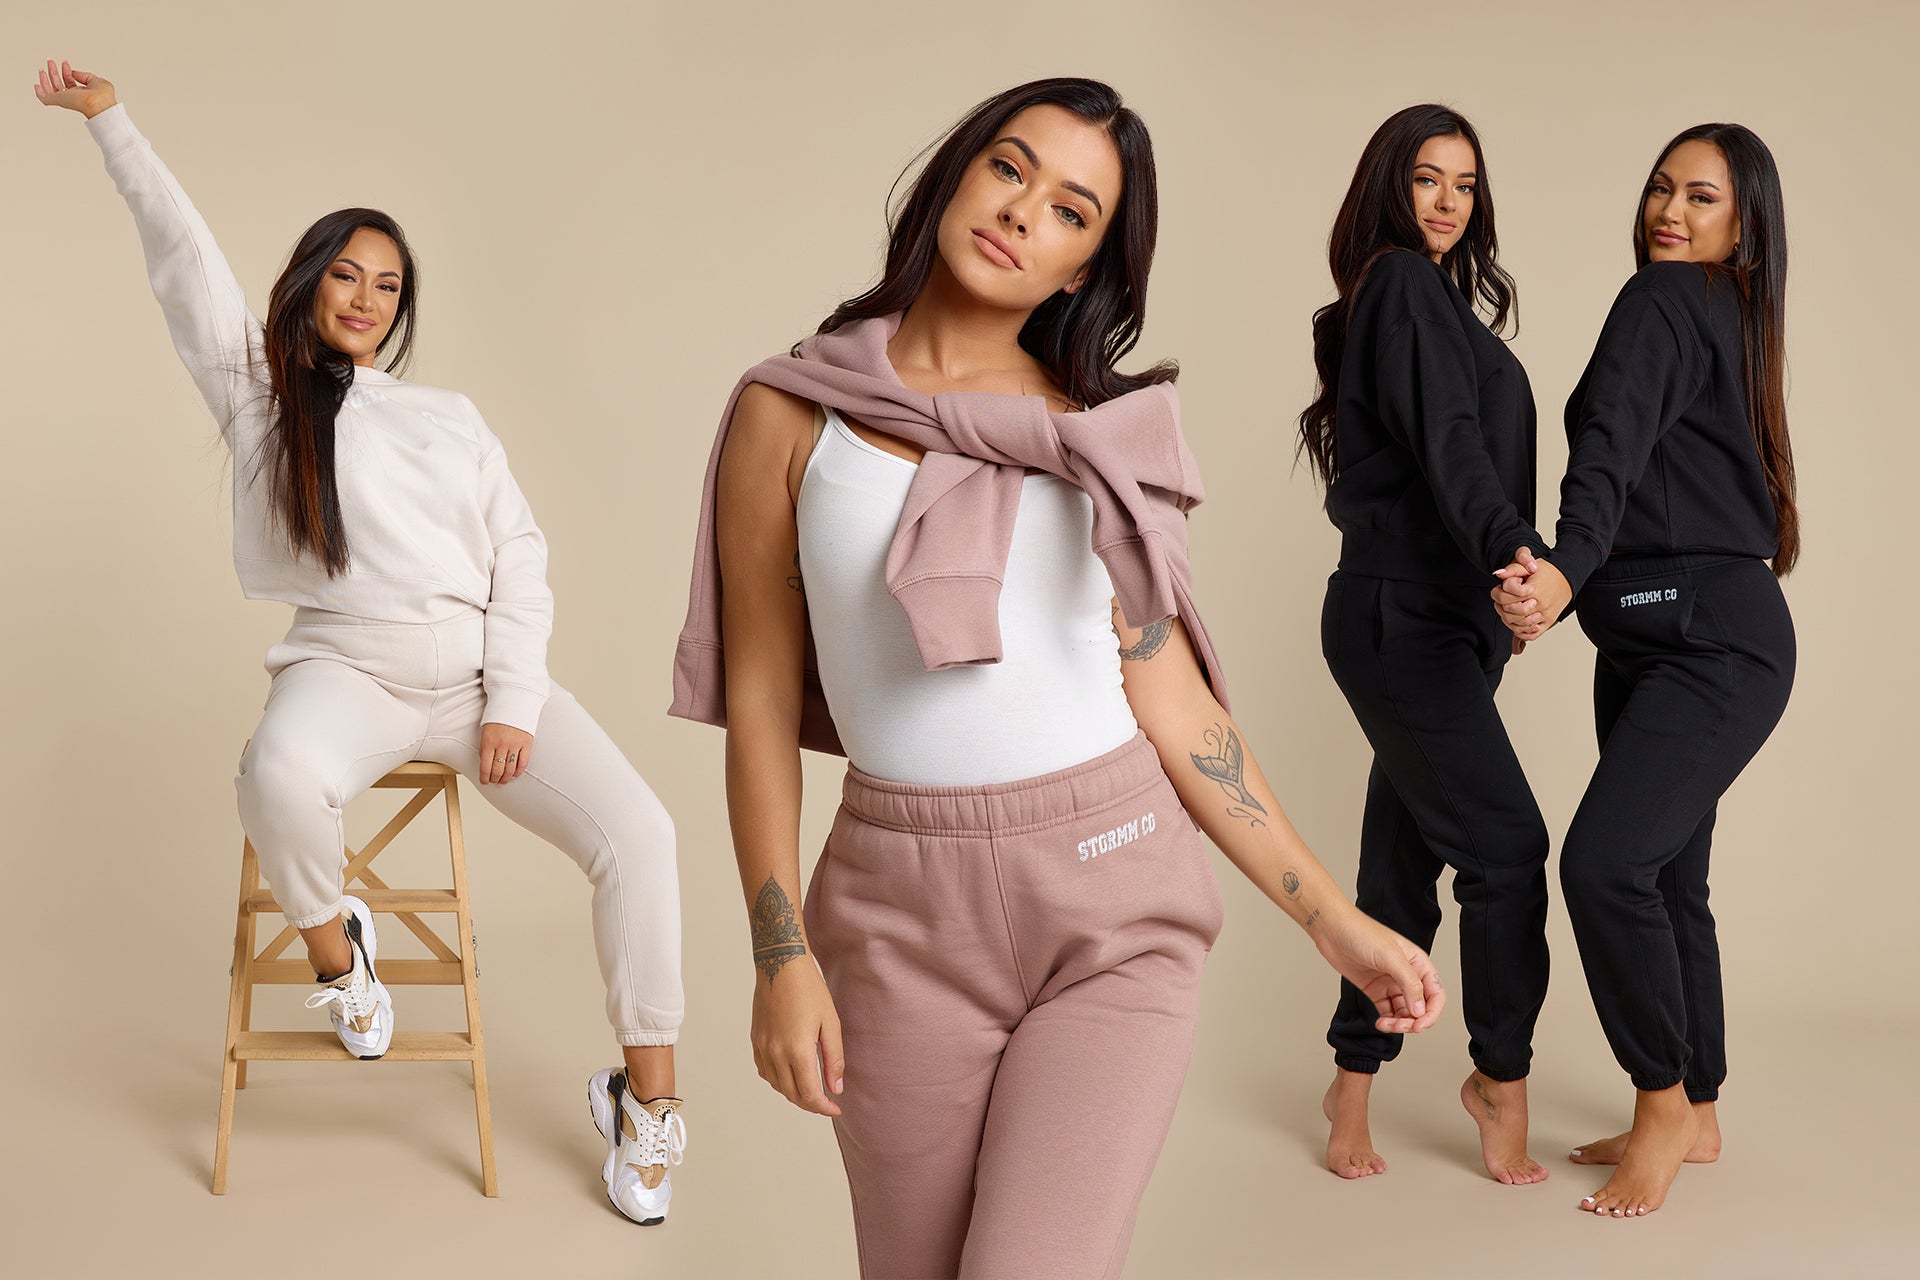 Image banner featuring the new Soft Touch Collection from Stormm Co, showcasing the Creamy Tan, Midnight Ebony, and Cocoa Blush tracksuits